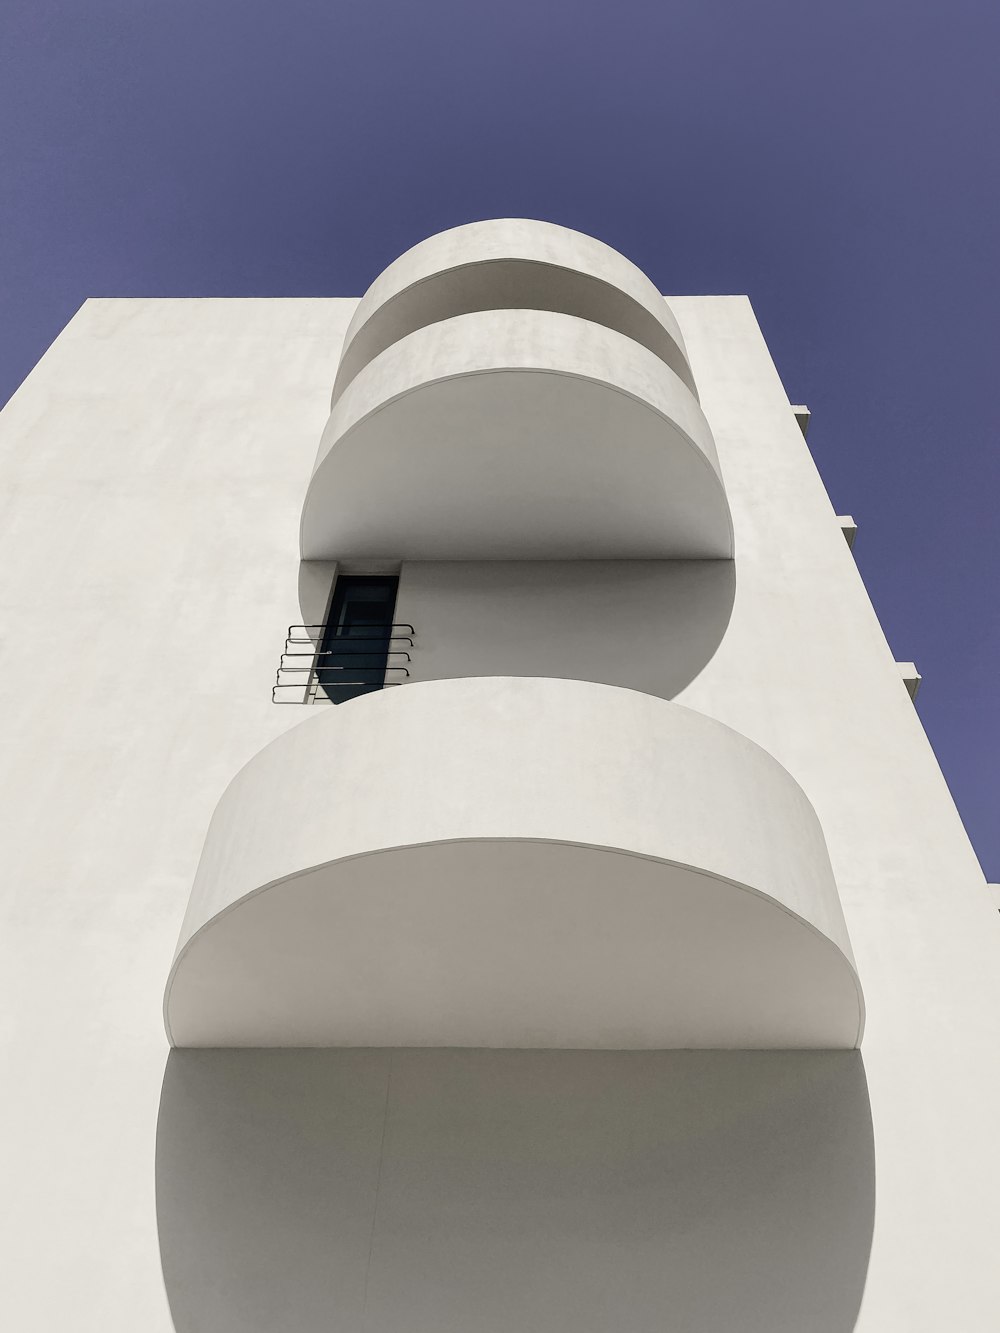 a tall white building with balconies and a window